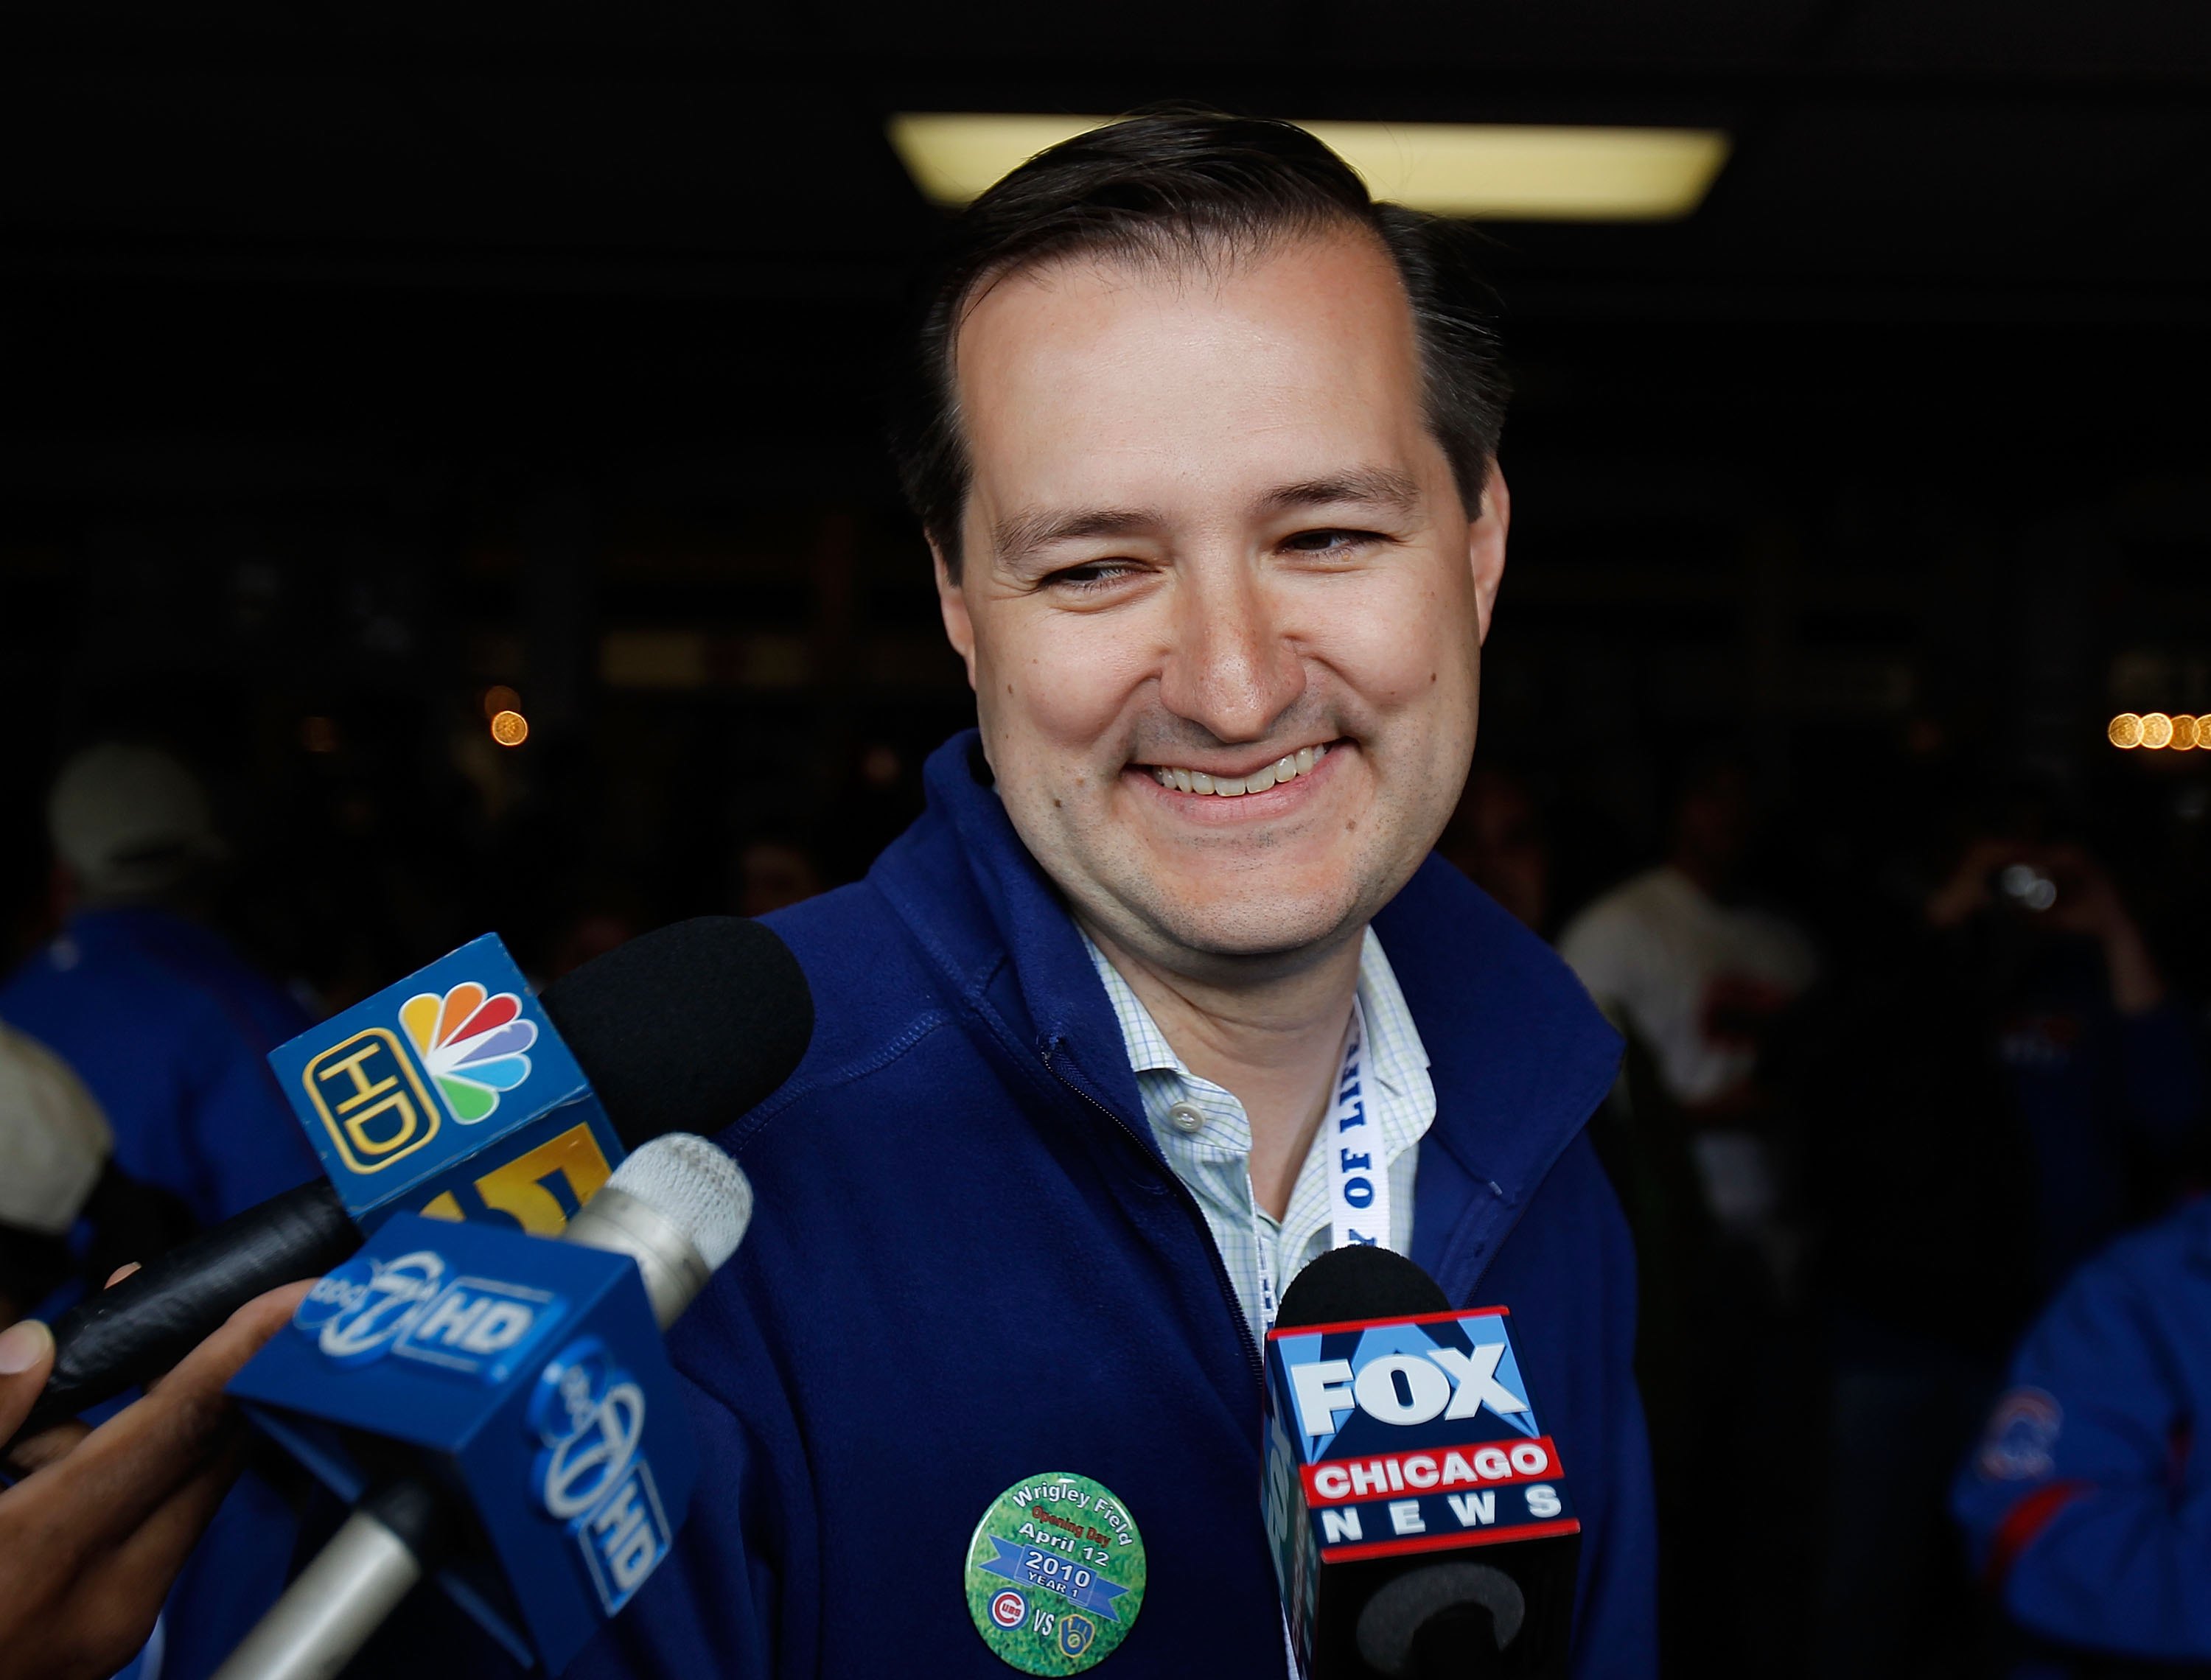 Cubs Owner Tom Ricketts talk about the upcoming season